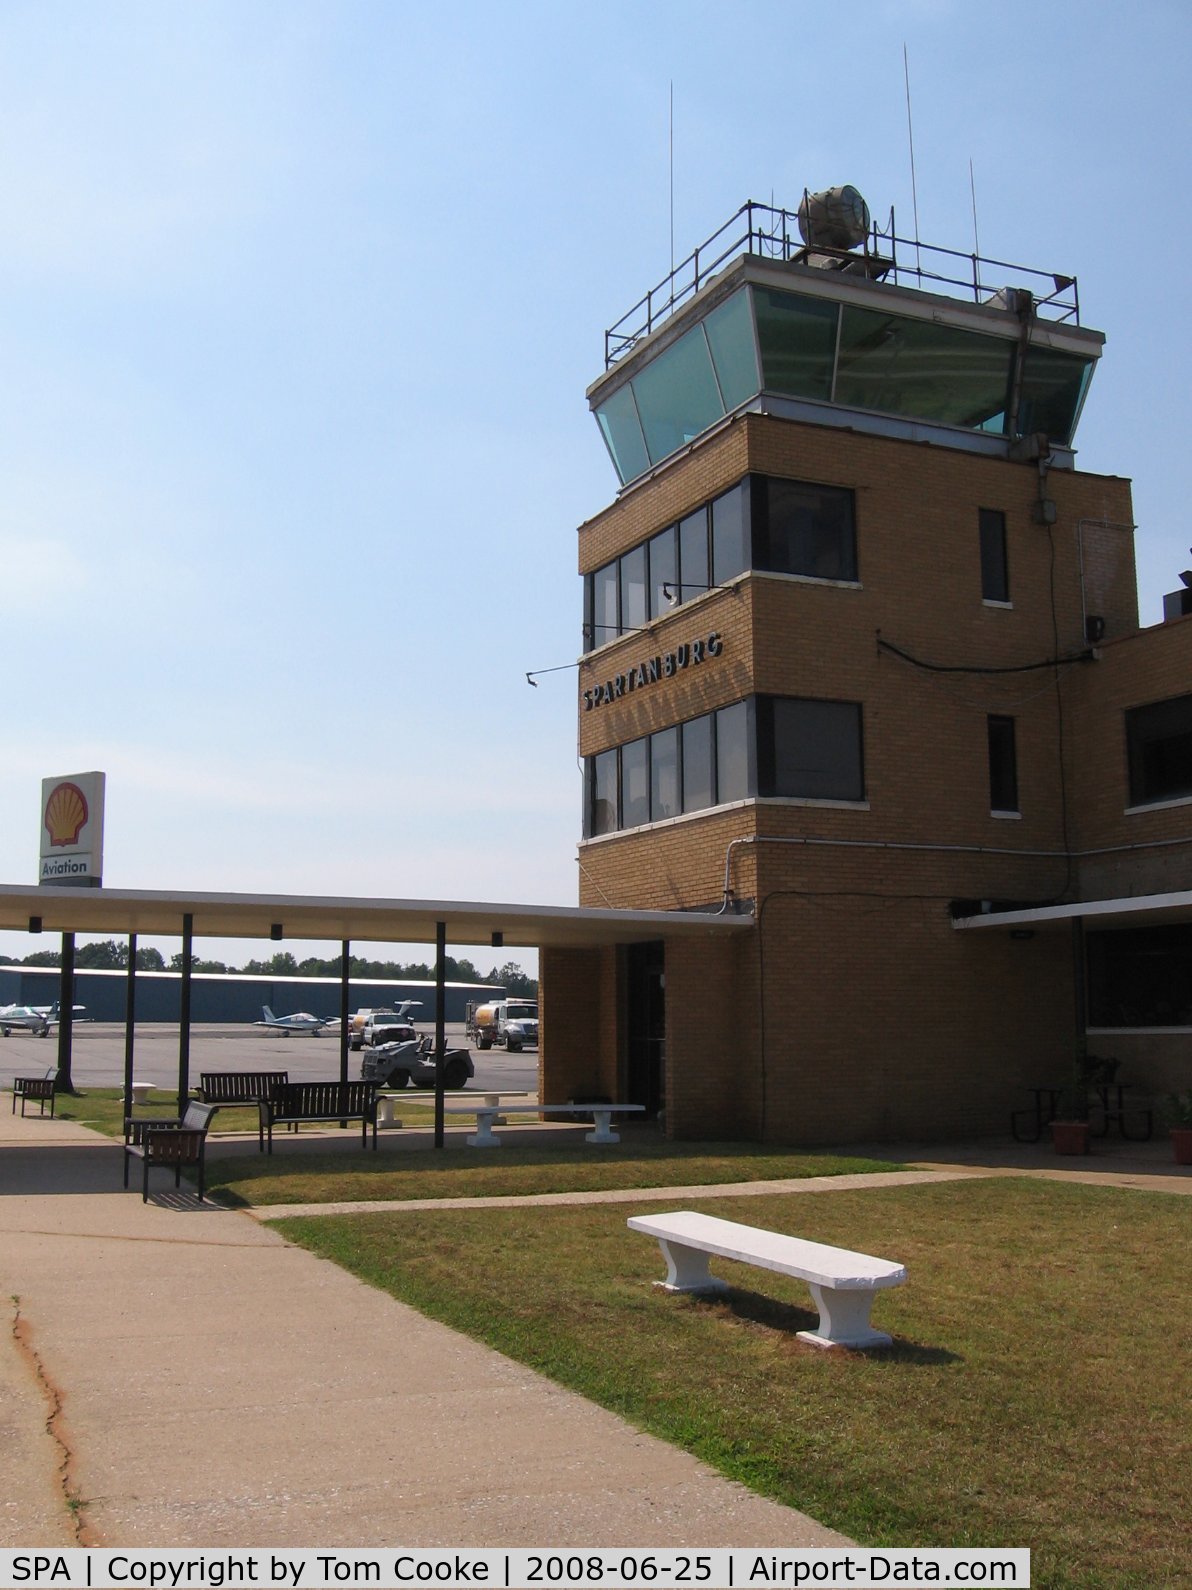 Spartanburg Downtown Memorial Airport (SPA) - the classic terminal building (no need to call tower, it's abandoned)